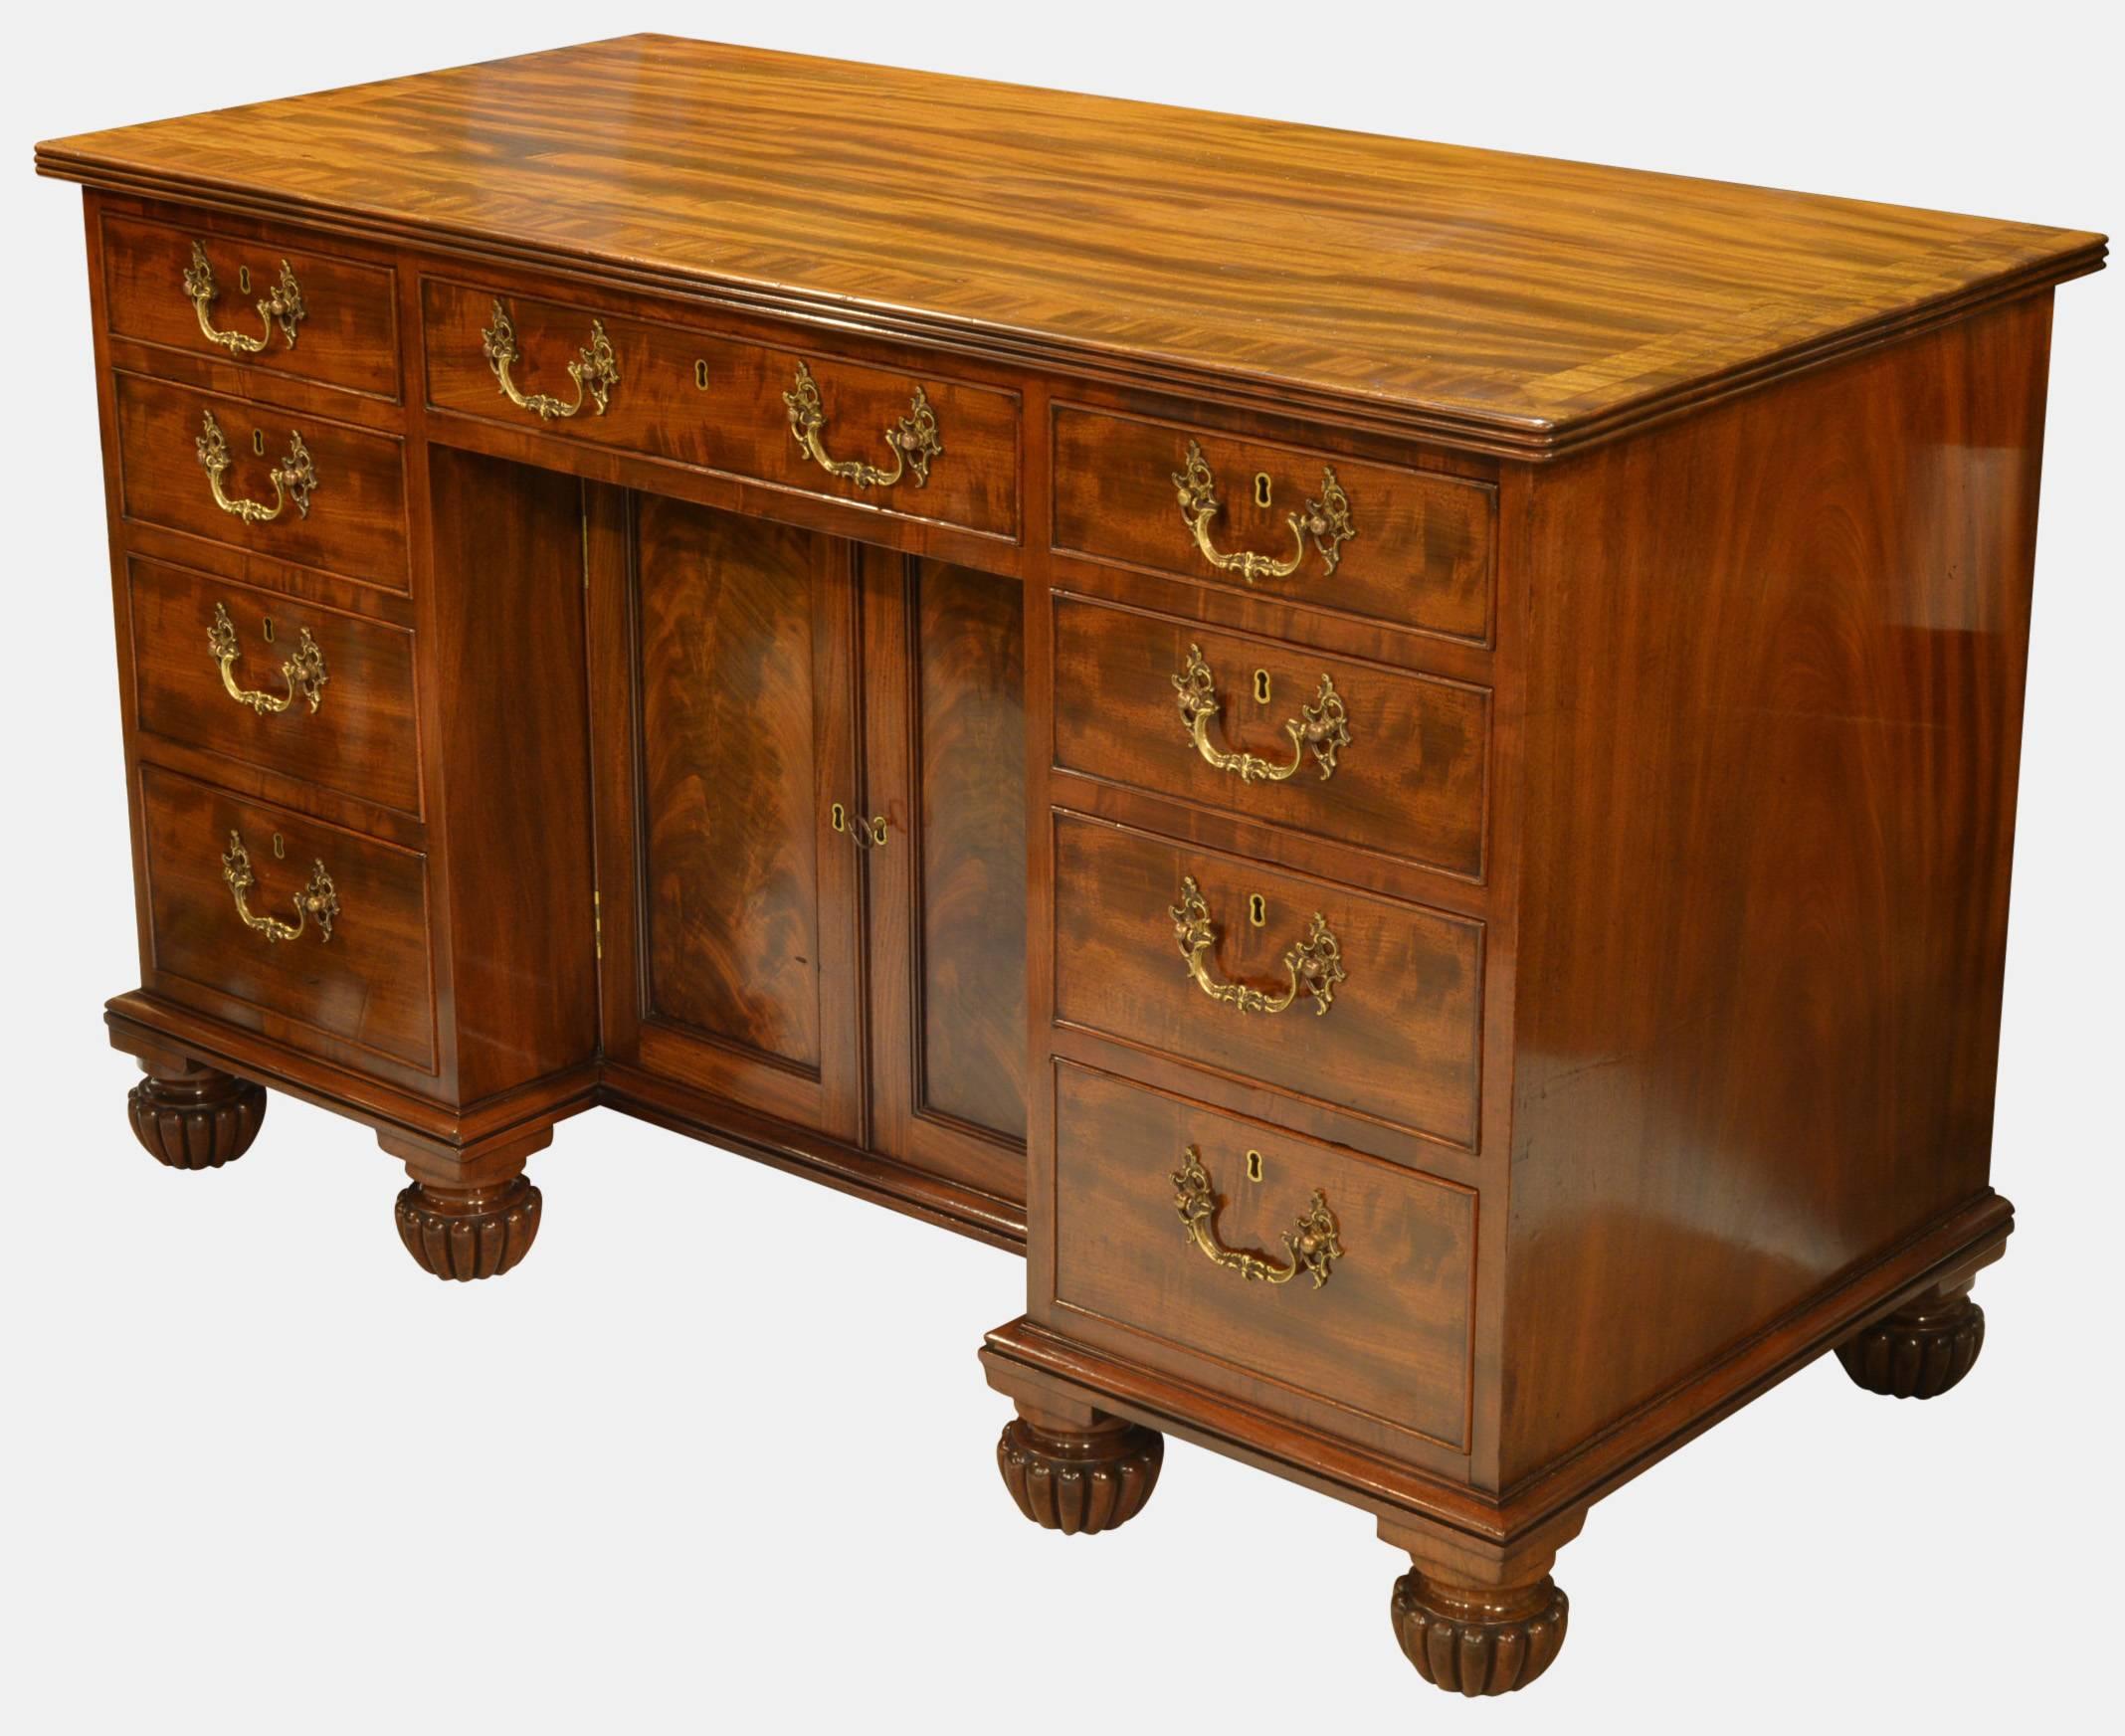 George III Kneehole Mahogany Desk In Excellent Condition For Sale In Salisbury, GB